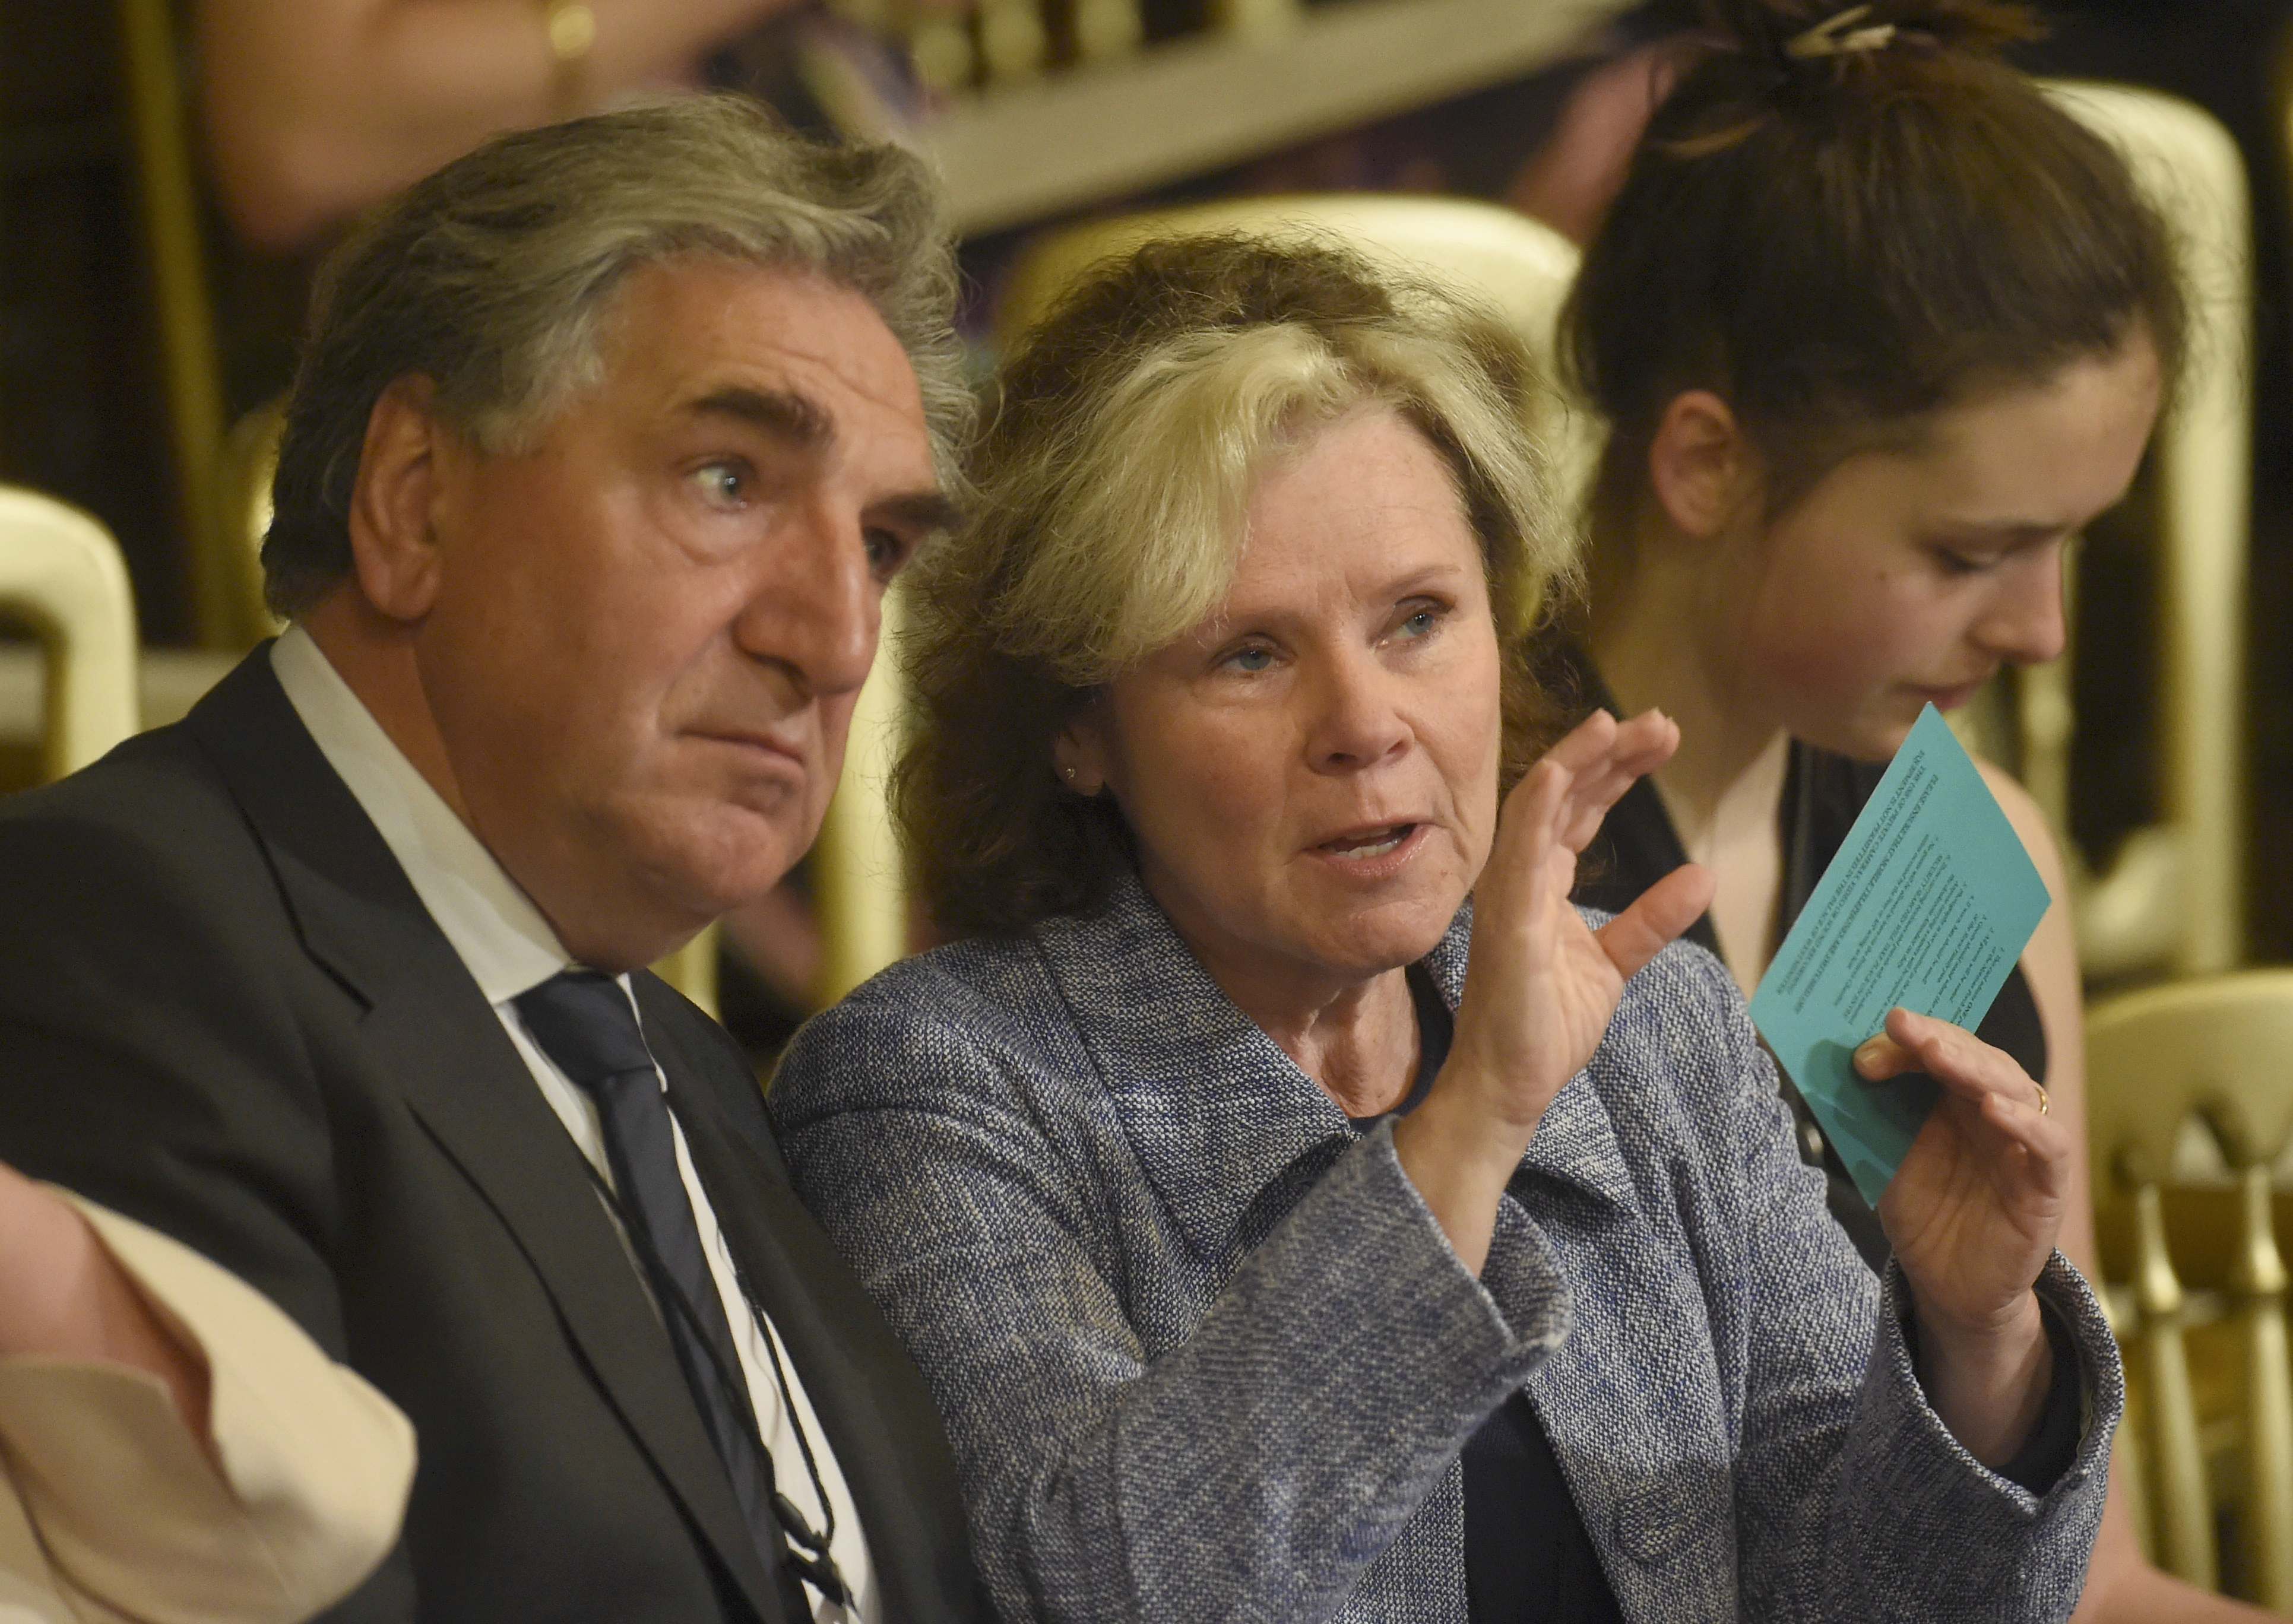 Jim Carter and Imelda Staunton seated before the State Opening of Parliament commenced at the Palace of Westminster at the Houses of Parliament in London, England, on May 18, 2016. | Source: Getty Images